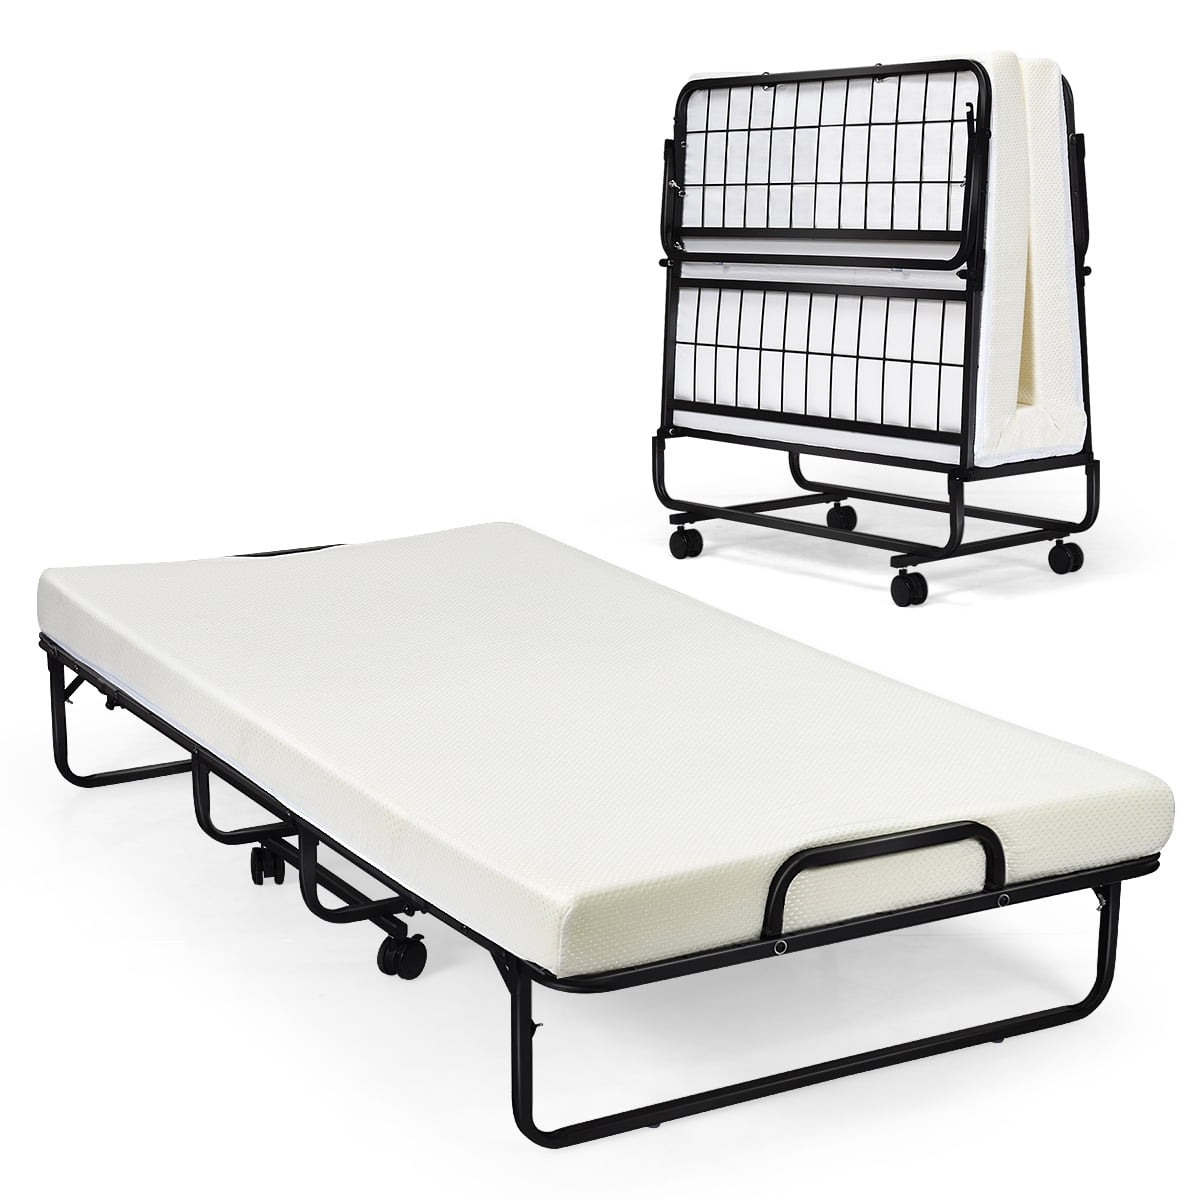 38-inch Beds Zi for sale online Milliard Universal Folding Bed Storage Cover Fits Twin Size